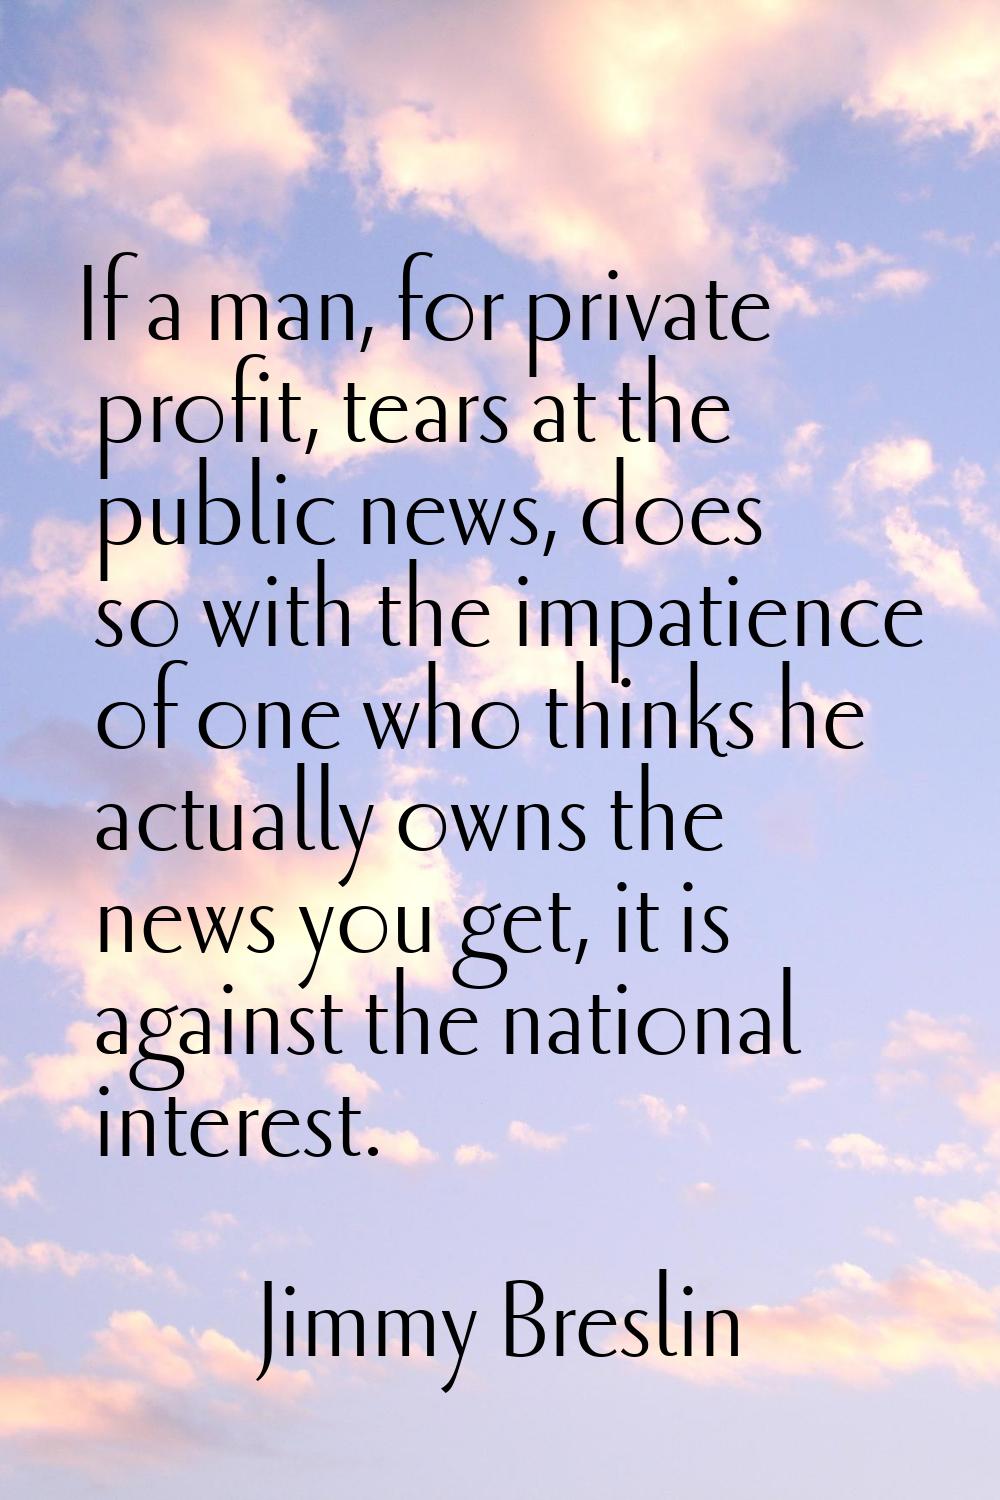 If a man, for private profit, tears at the public news, does so with the impatience of one who thin